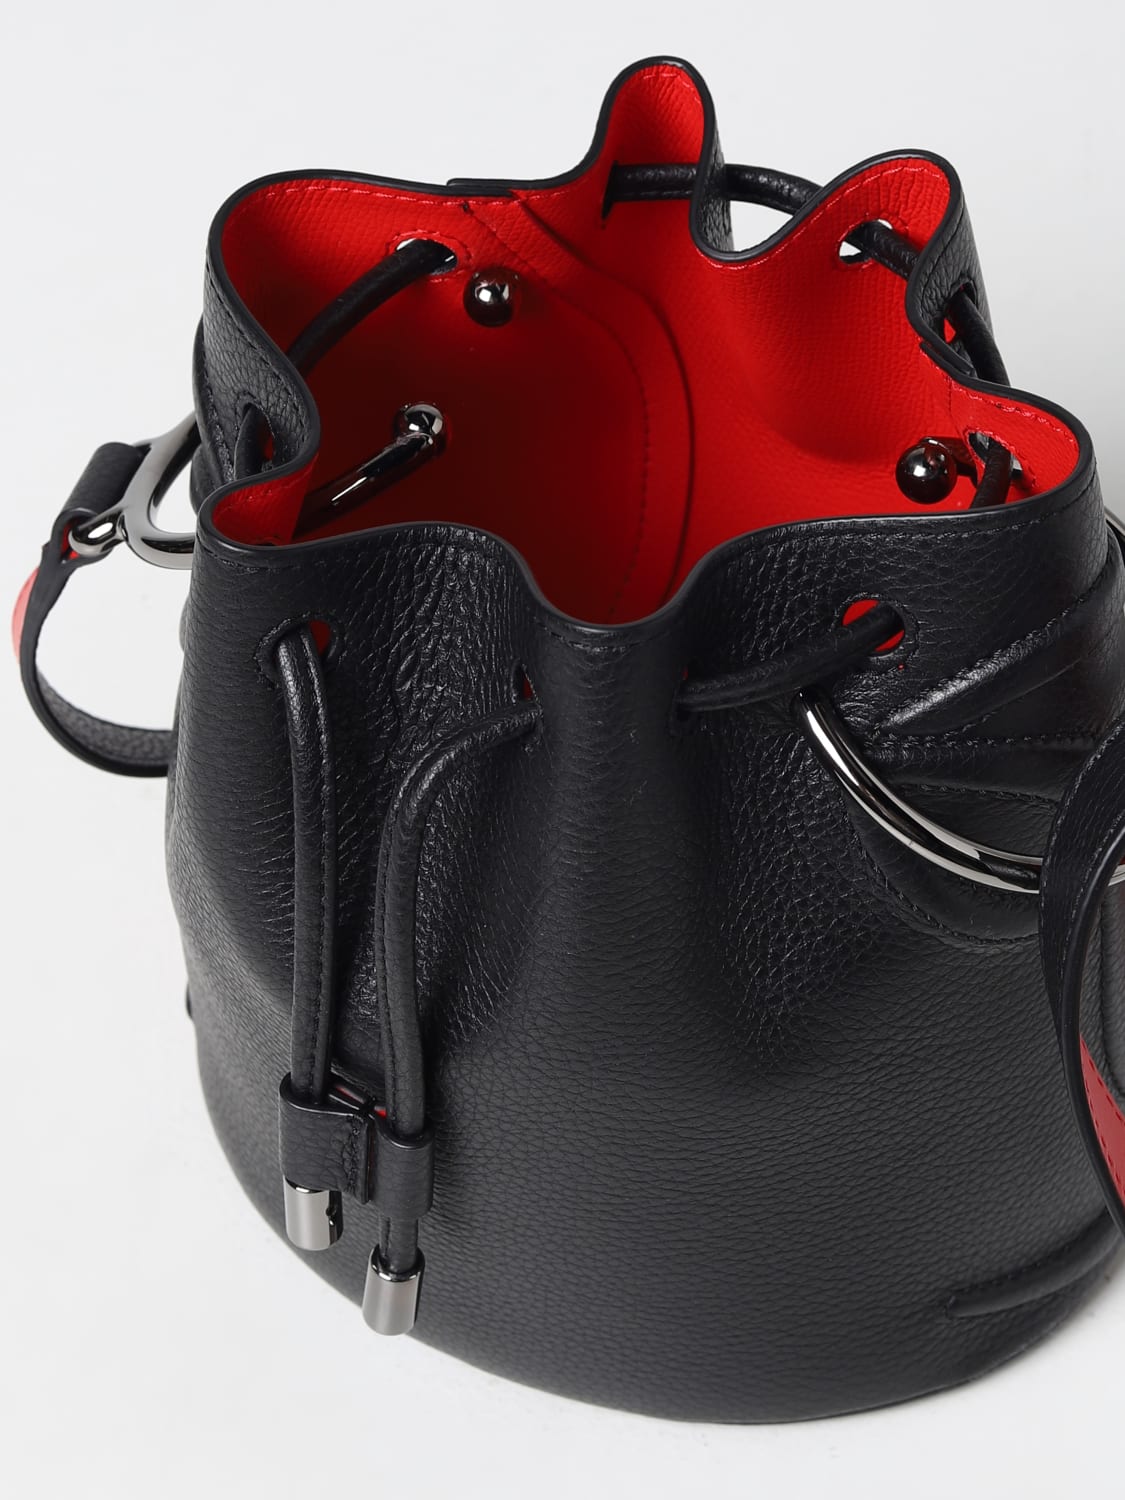 CHRISTIAN LOUBOUTIN: By My Side bag in grained leather - Black